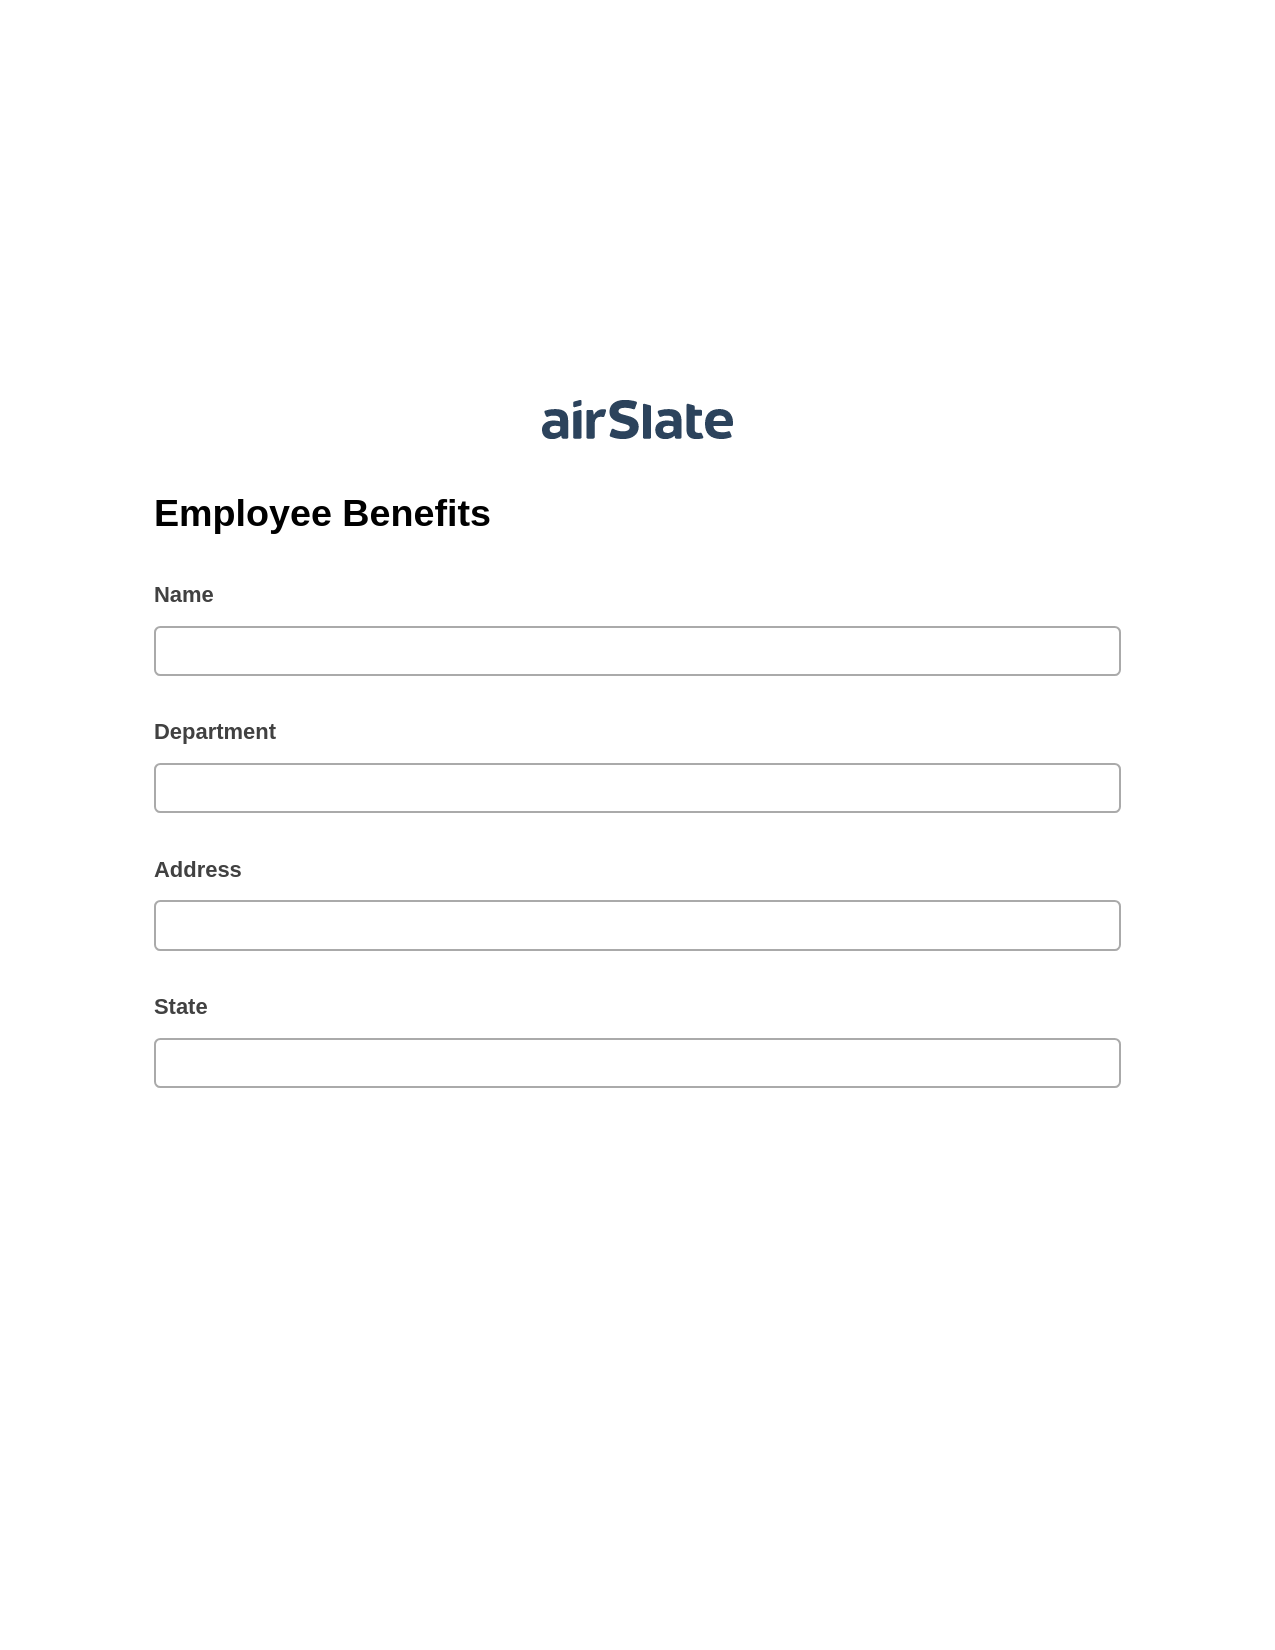 Employee Benefits Pre-fill from Office 365 Excel Bot, Revoke Access Bot, Export to Excel 365 Bot